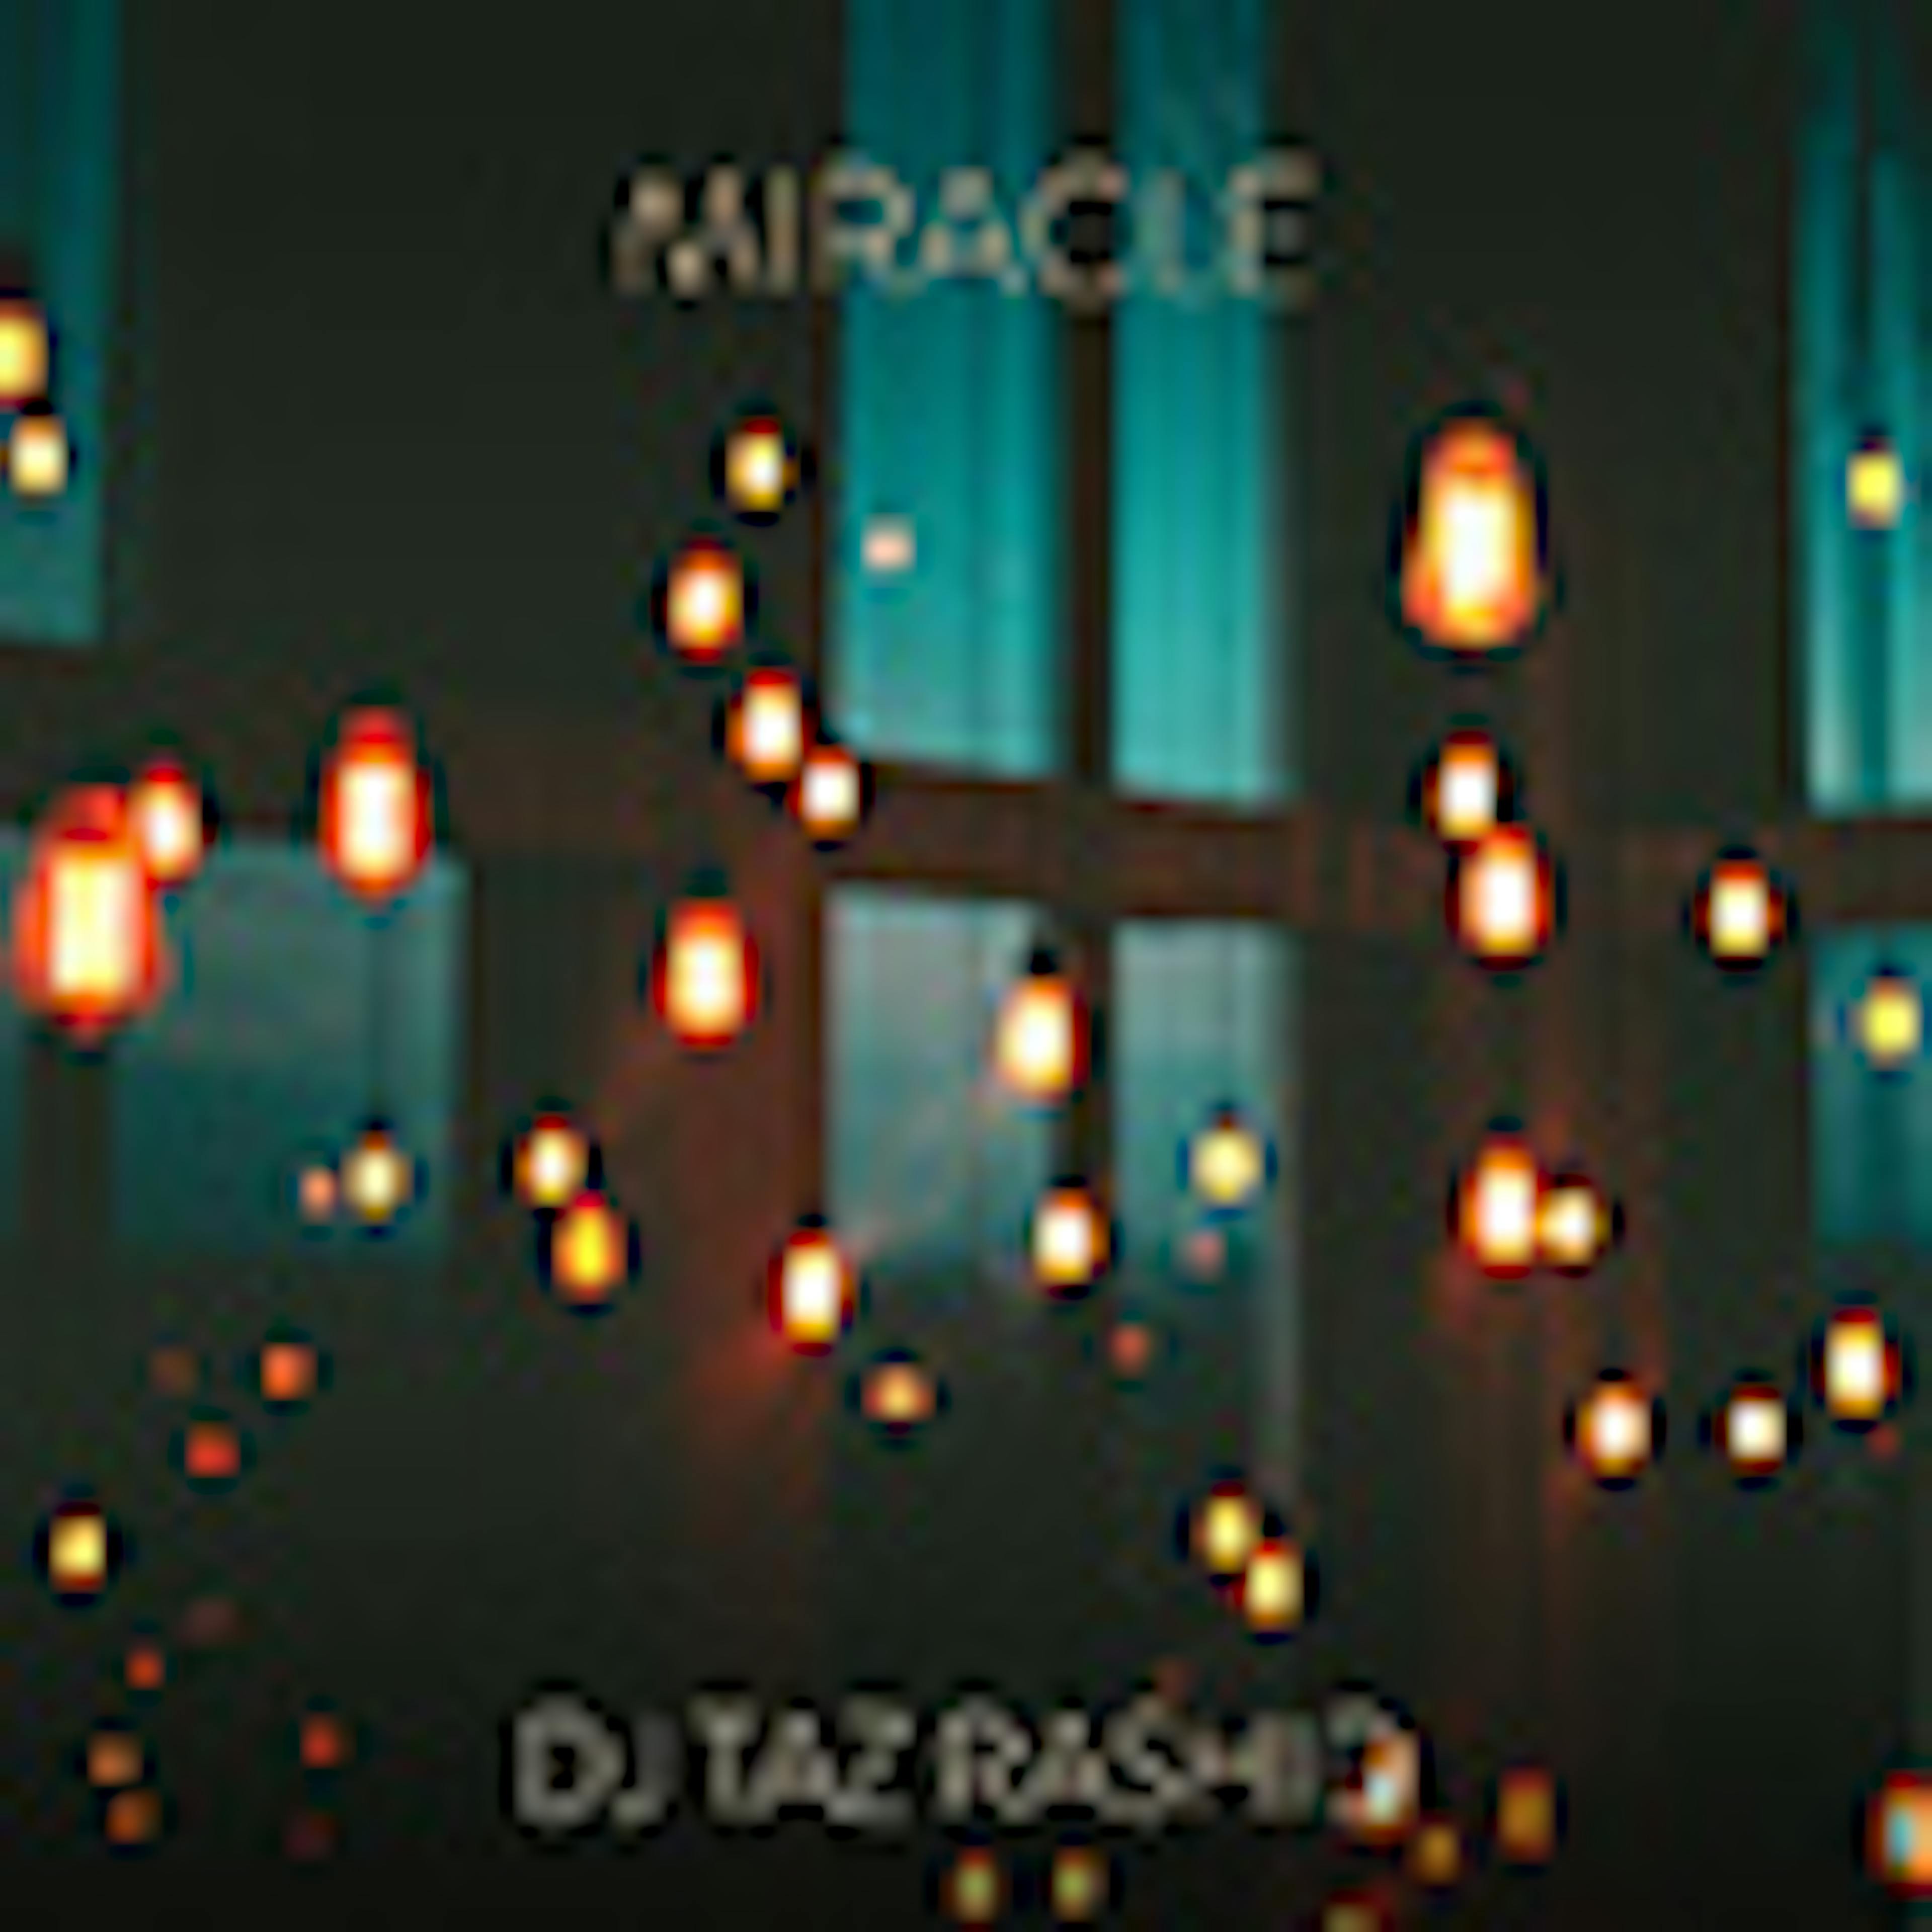 Miracle album cover